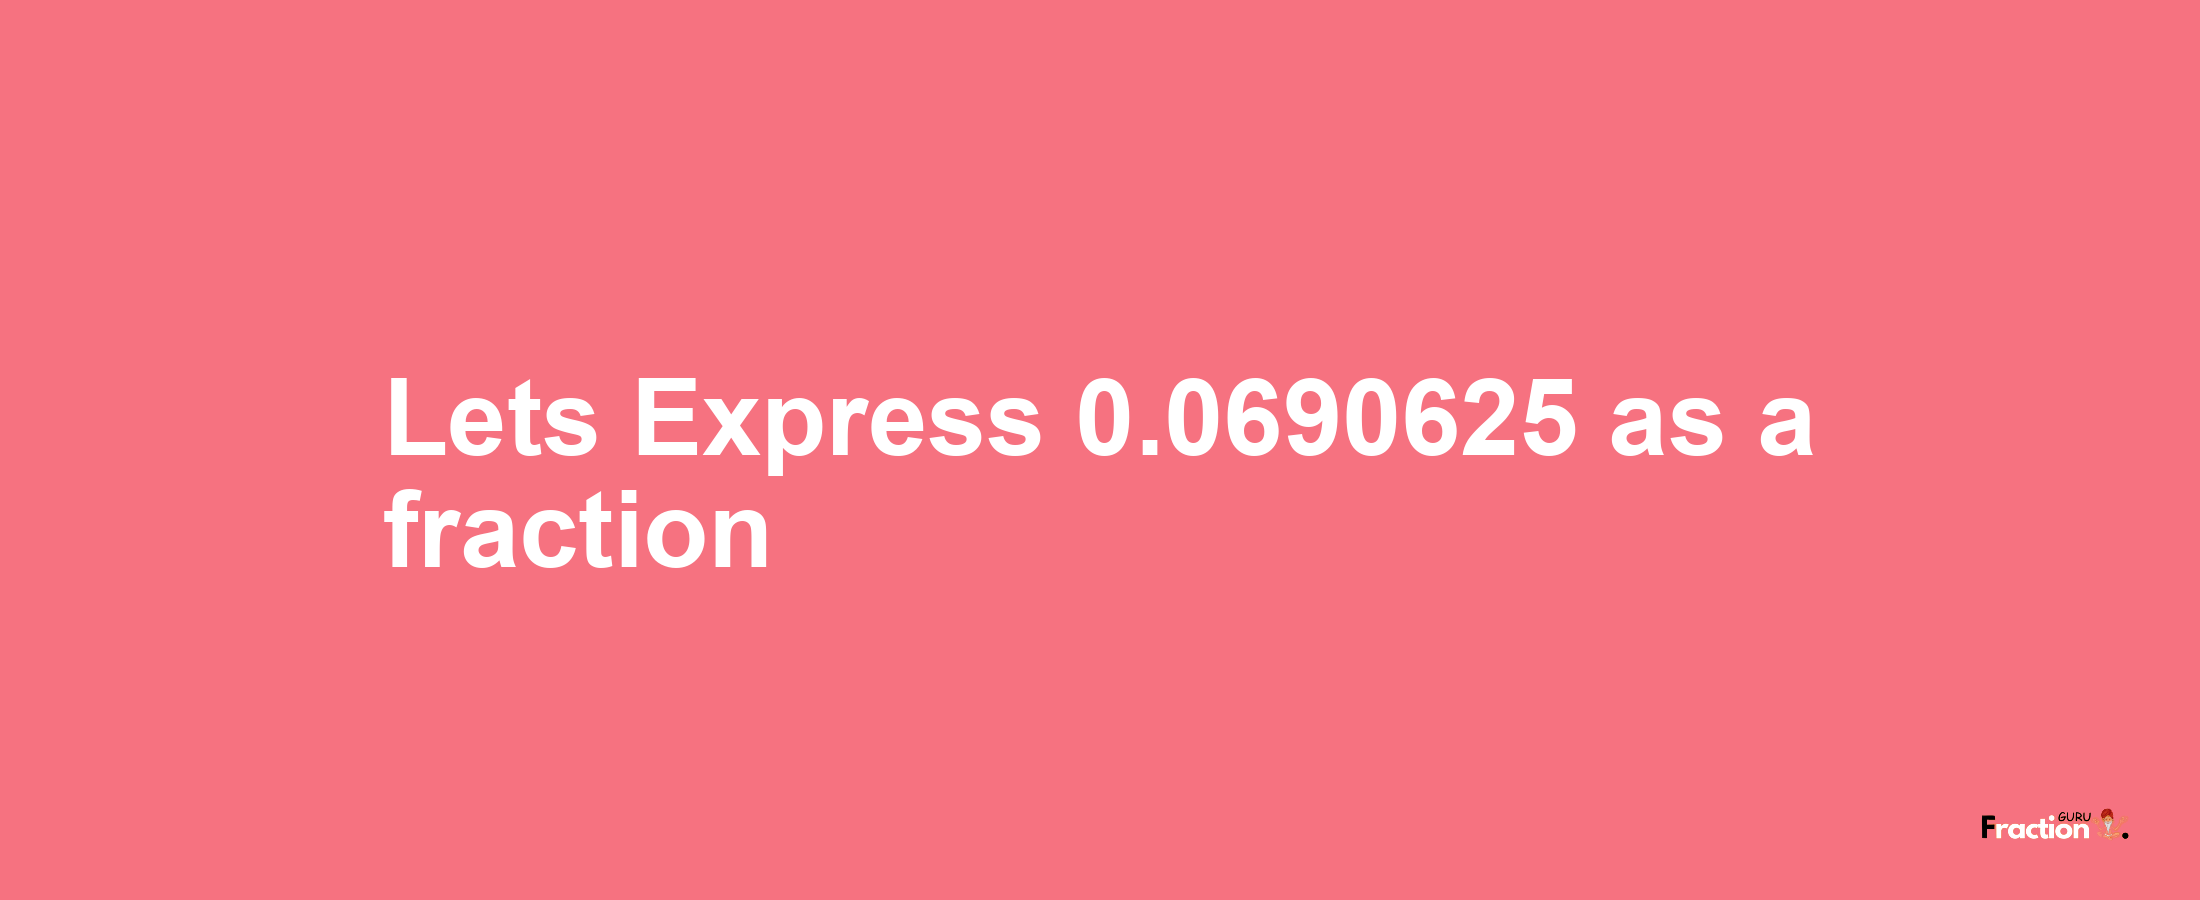 Lets Express 0.0690625 as afraction